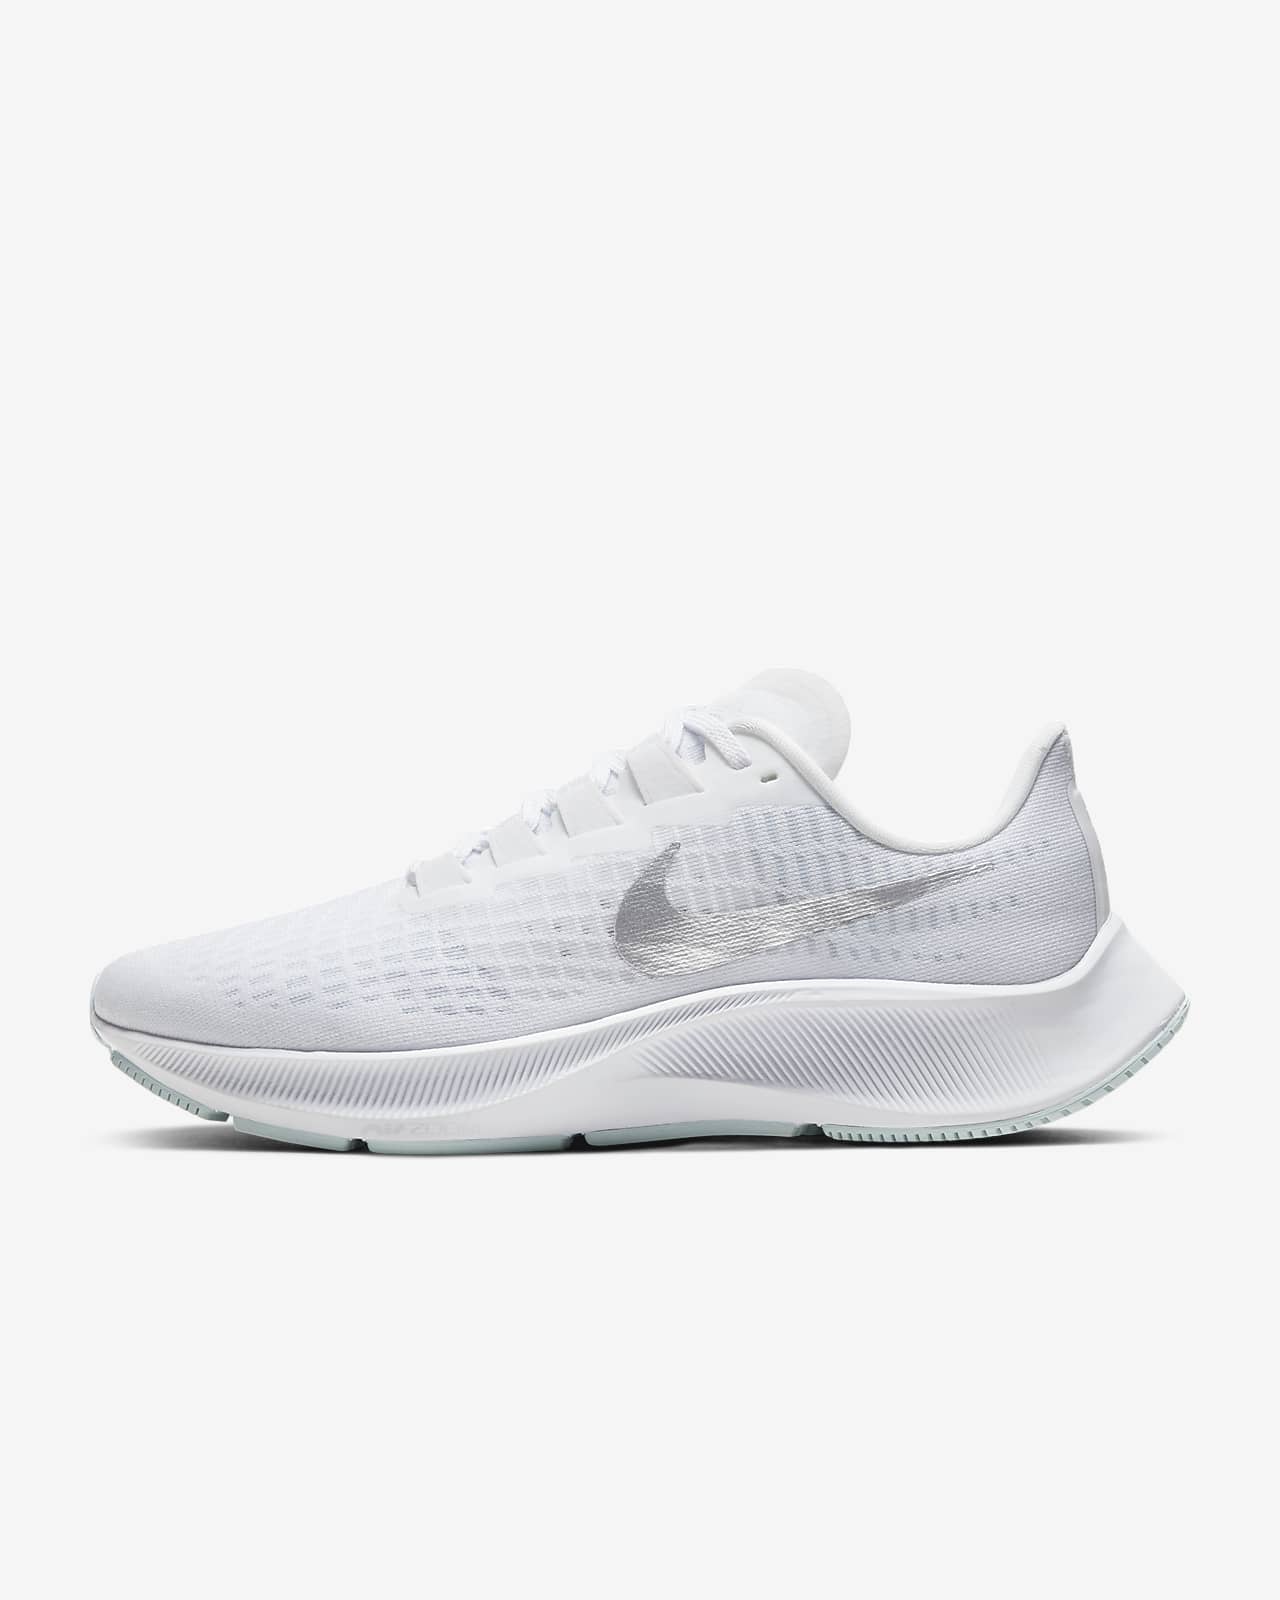 white and grey nike running shoes